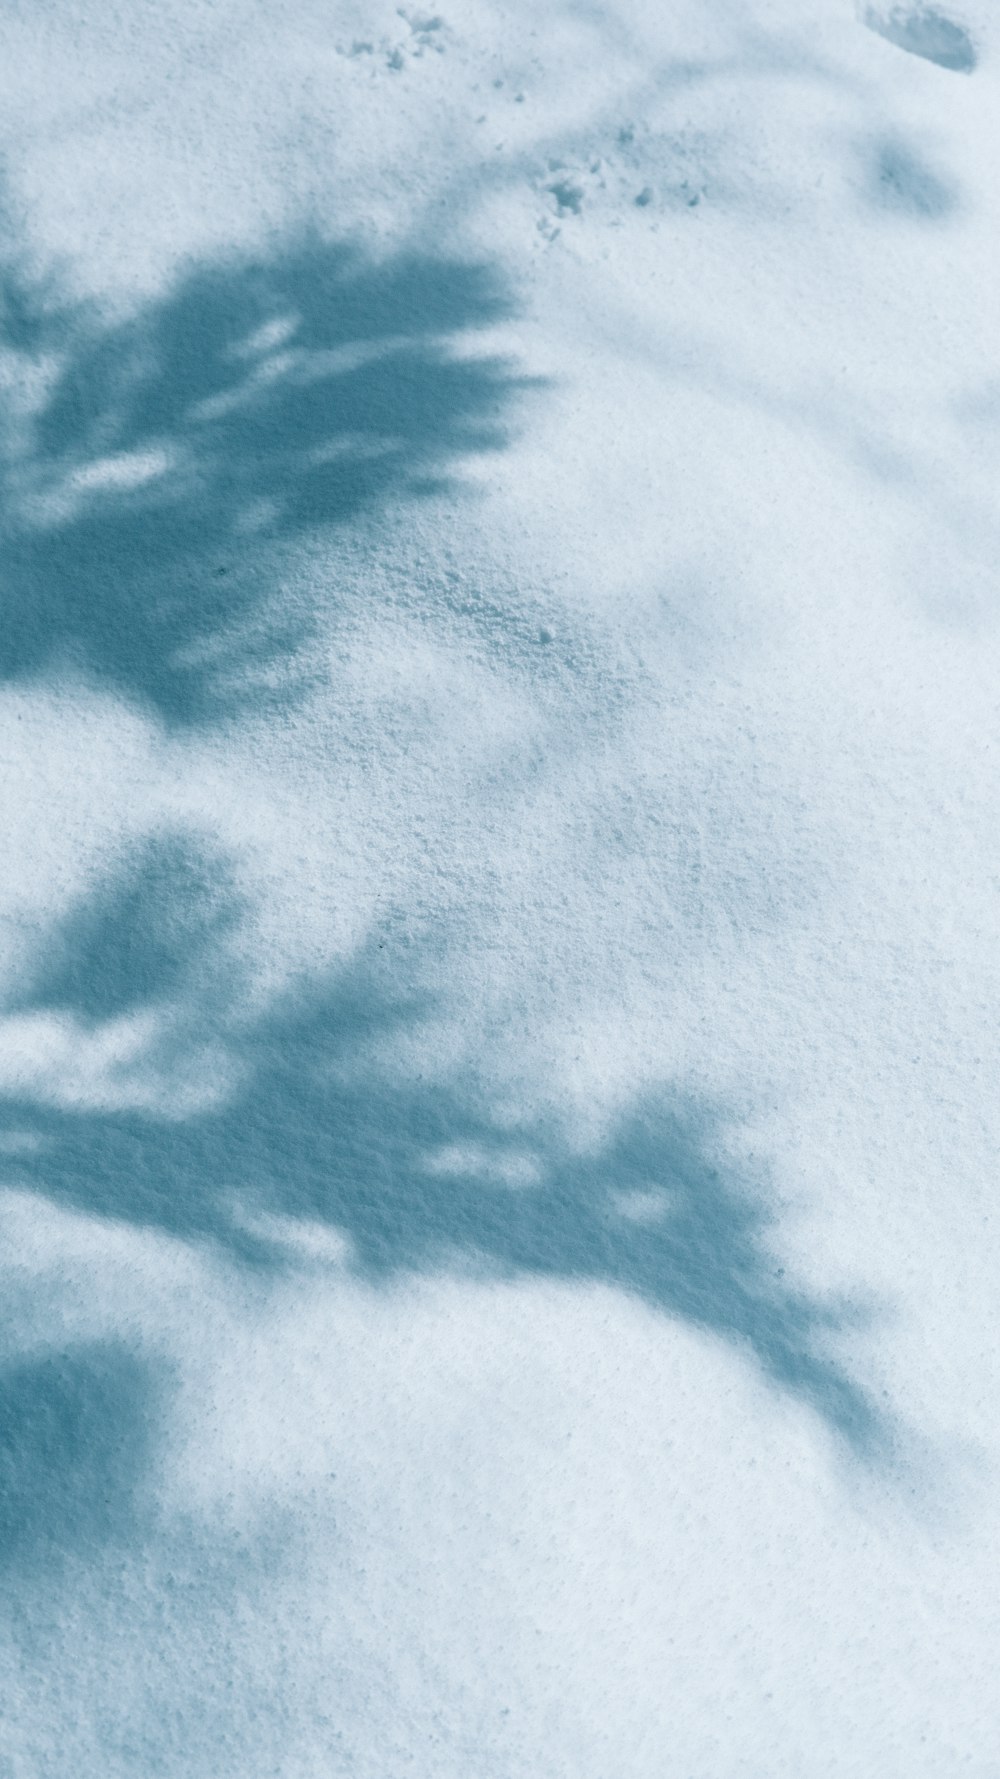 the shadow of a tree on the snow